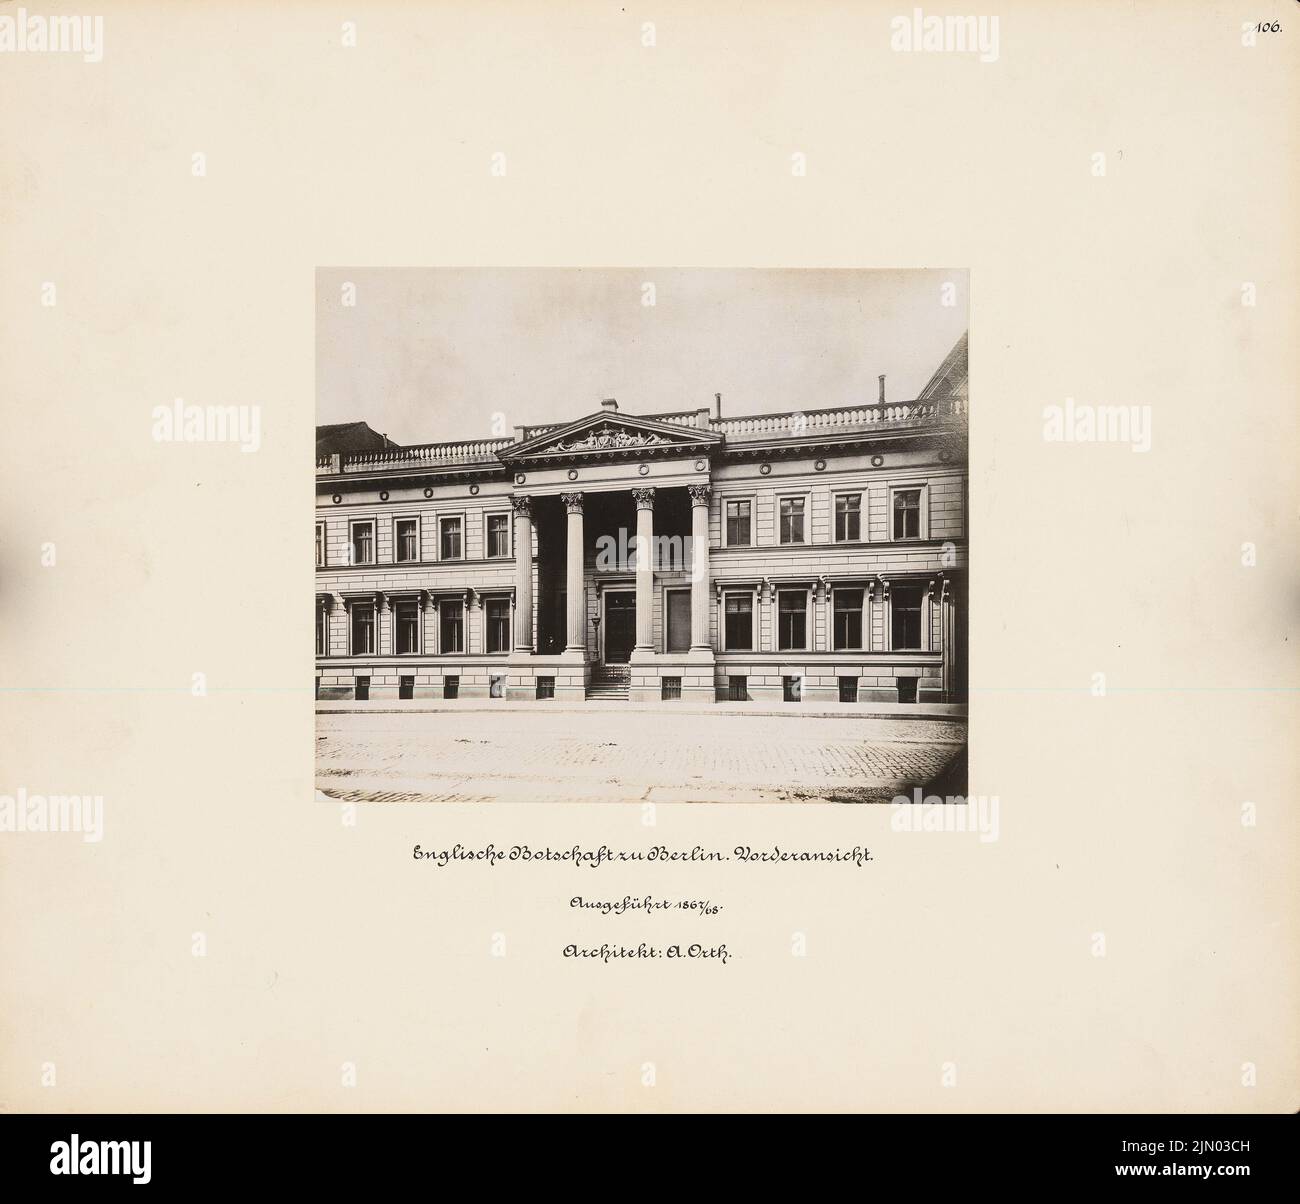 Orth August (1828-1901), English embassy (formerly Palais Strousberg) in Berlin (1867-1868): front view of the completed building. Photo on cardboard, 33.5 x 39.1 cm (including scan edges) Orth August  (1828-1901): Englische Botschaft (früher Palais Strousberg), Berlin Stock Photo